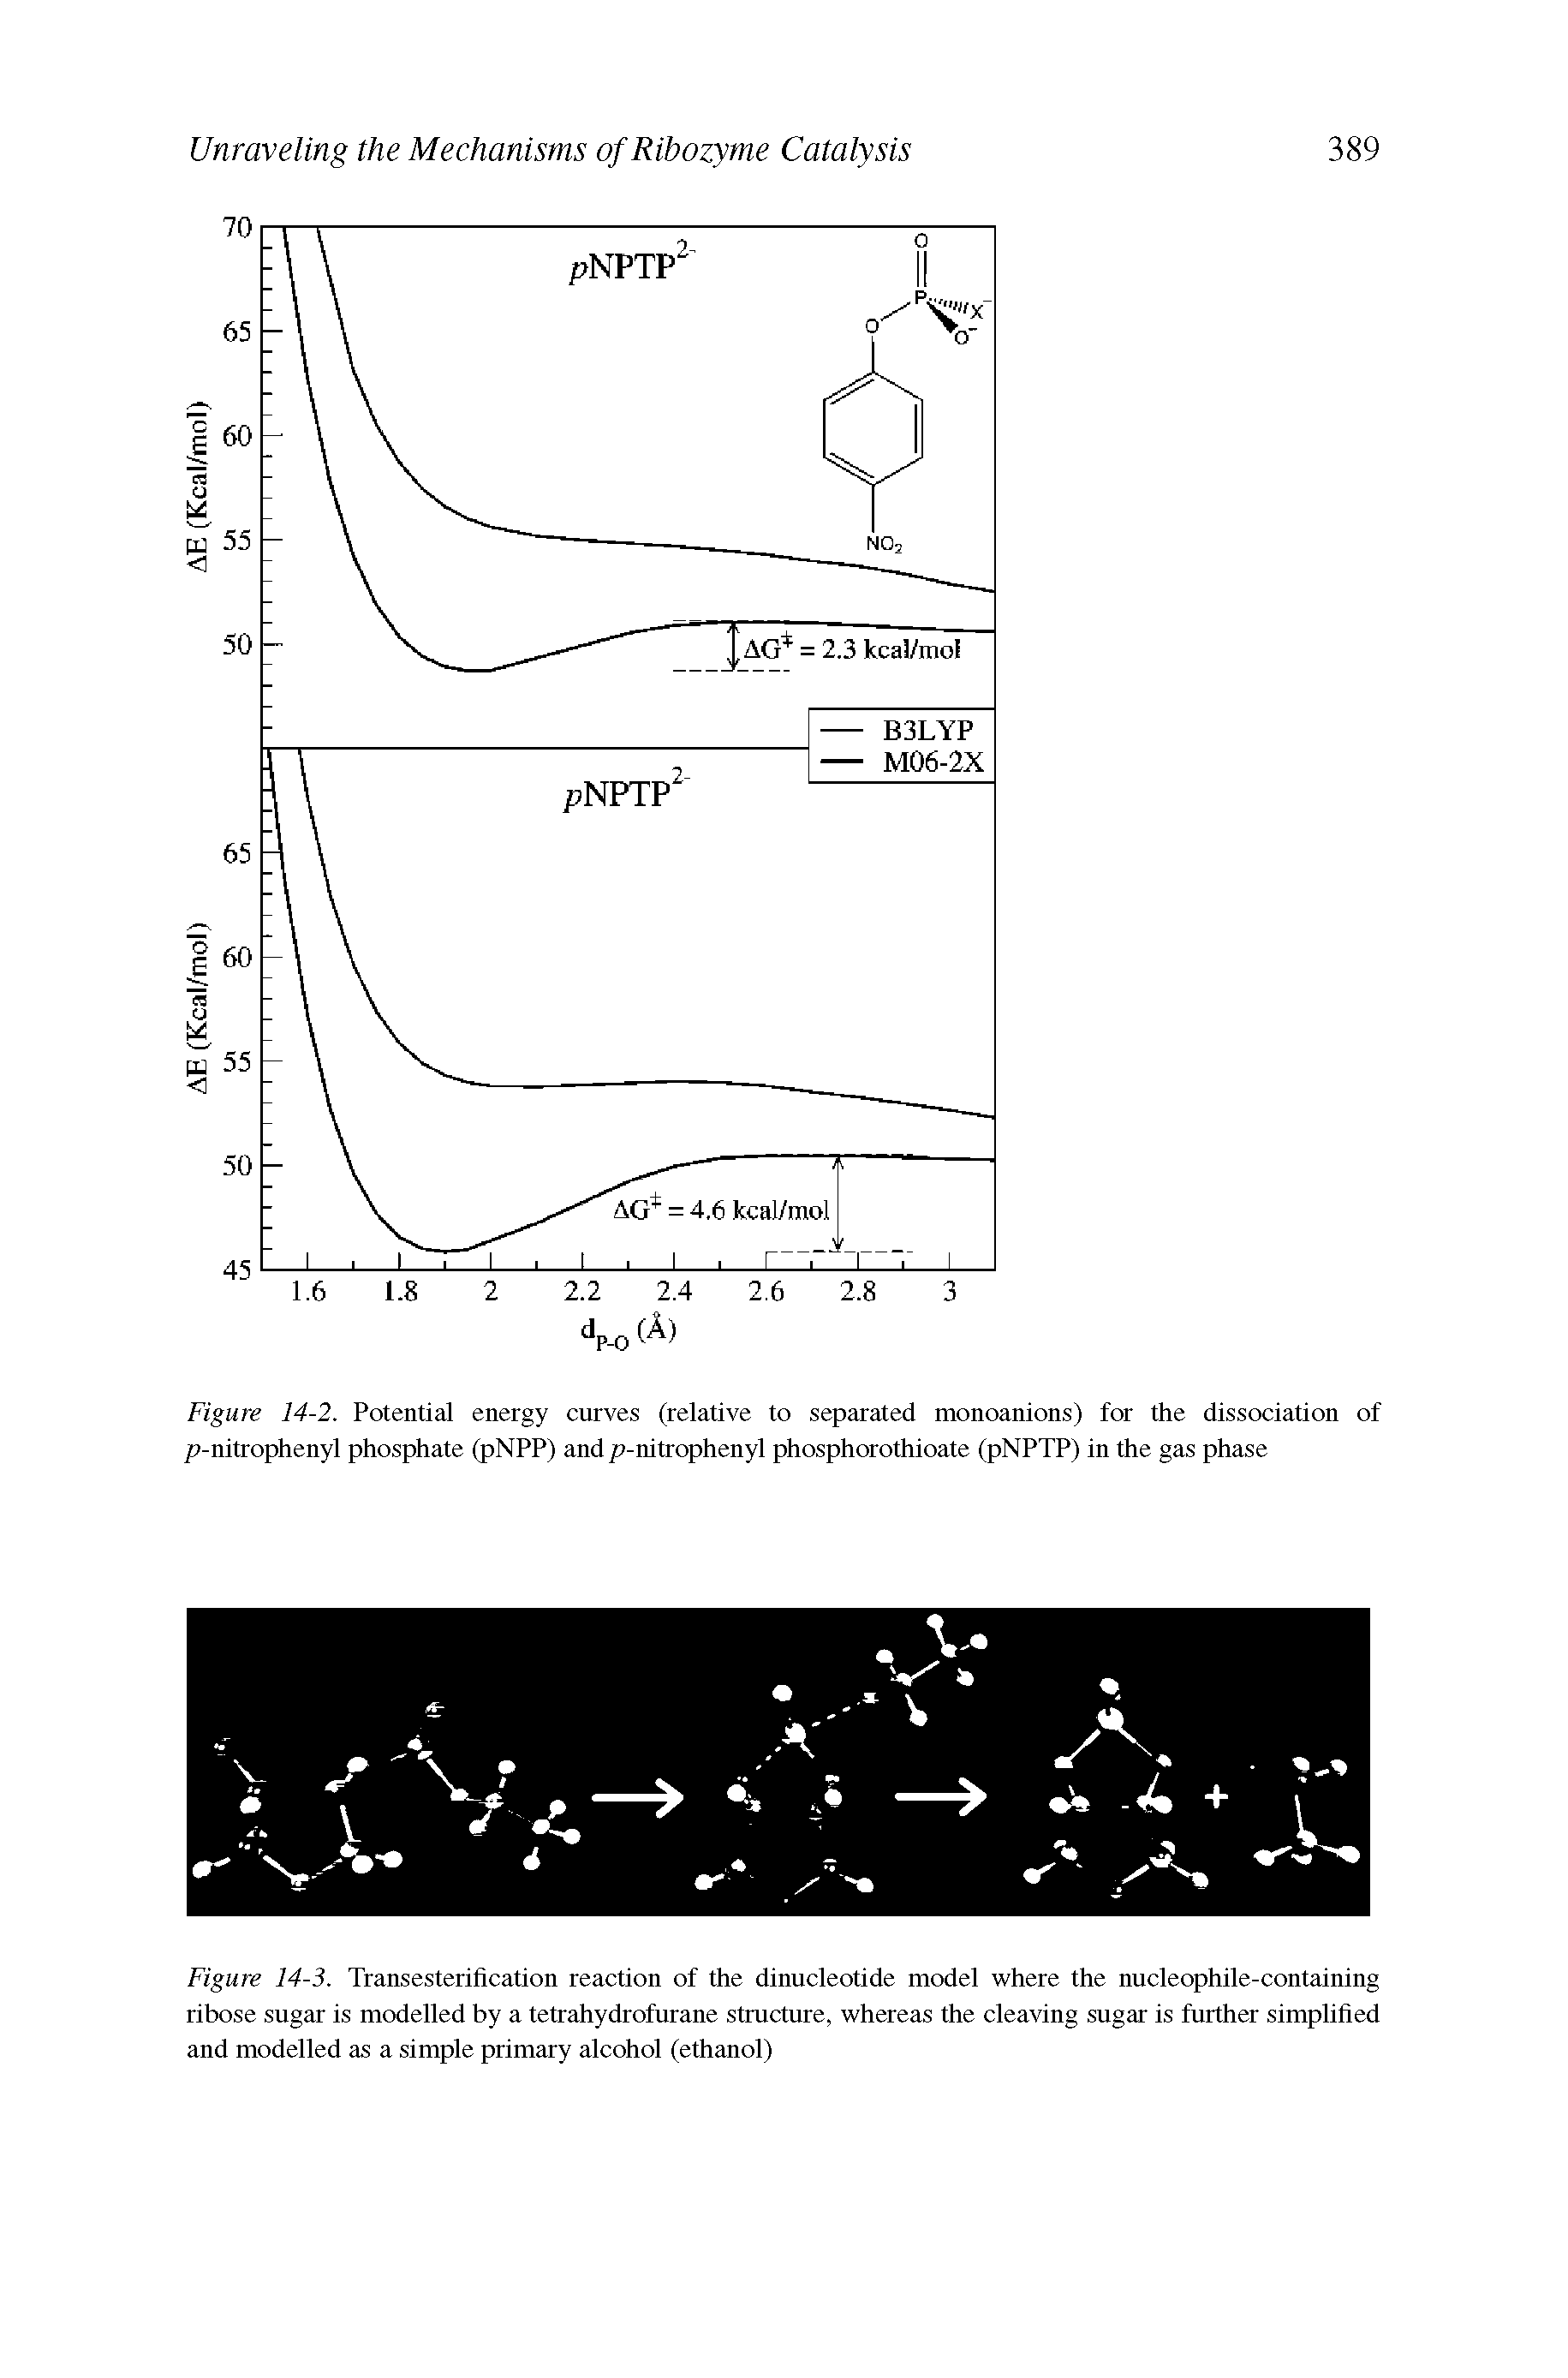 Figure 14-3. Transesterification reaction of the dinucleotide model where the nucleophile-containing ribose sugar is modelled by a tetrahydrofurane structure, whereas the cleaving sugar is further simplified and modelled as a simple primary alcohol (ethanol)...